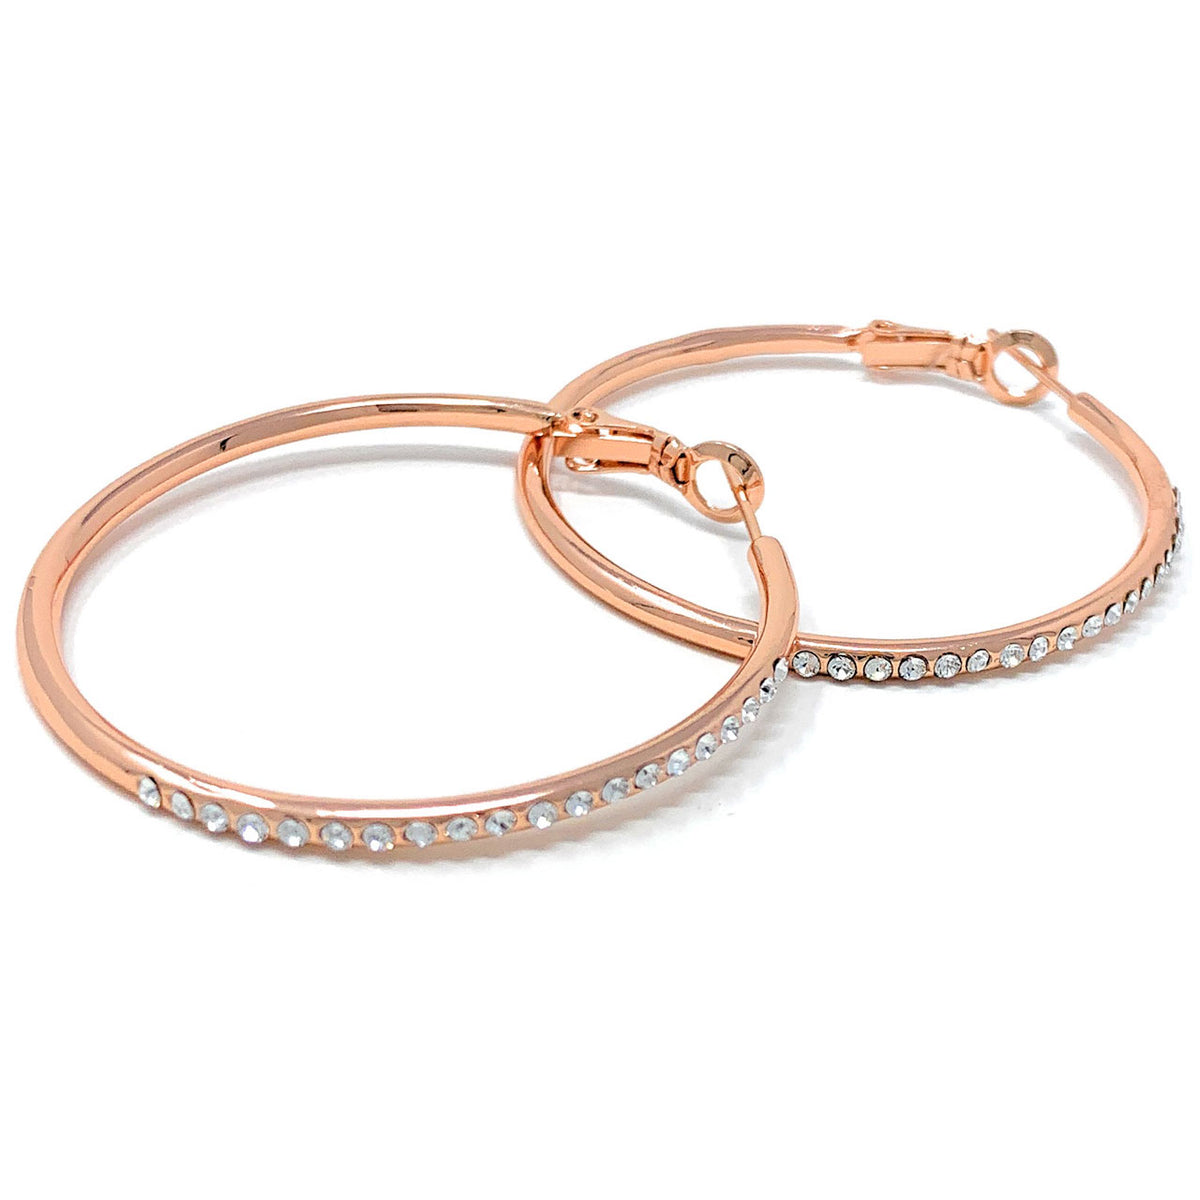 Amelia Large Pave Hoop Earrings with White Clear Round Crystals from Swarovski Rose Gold Plated - Ed Heart